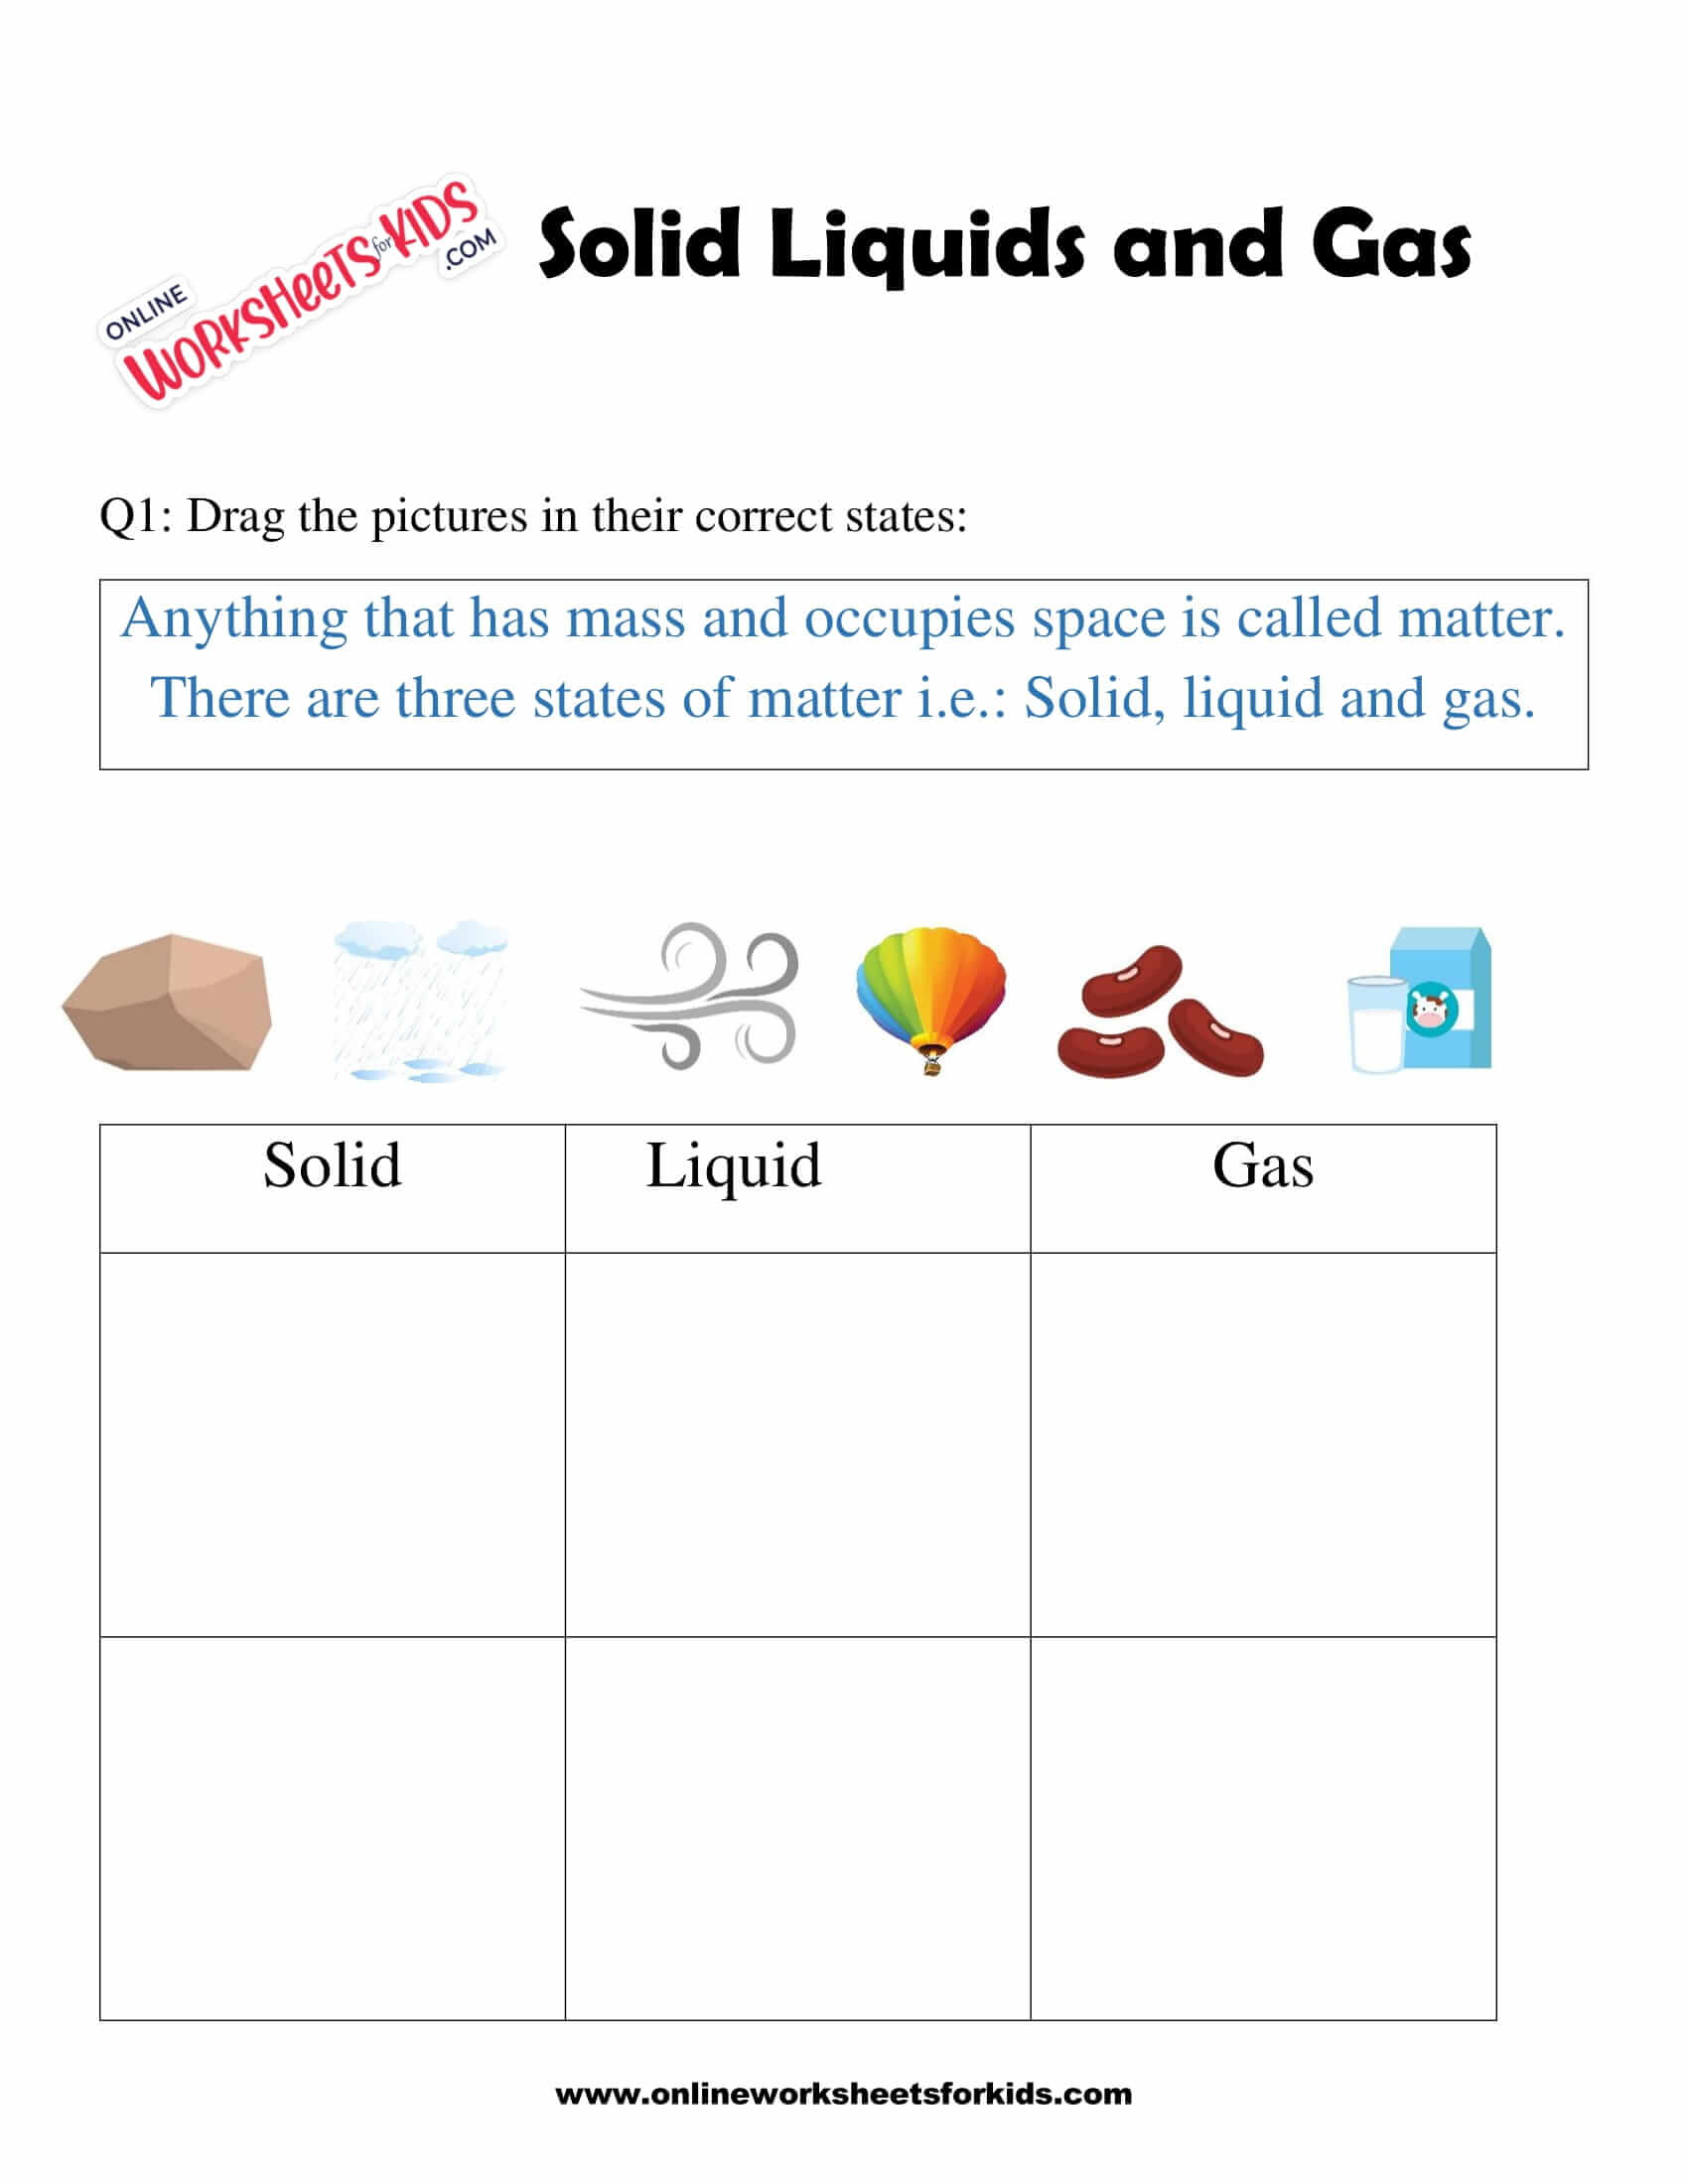 solid-liquids-and-gas-worksheet-for-grade-1-1